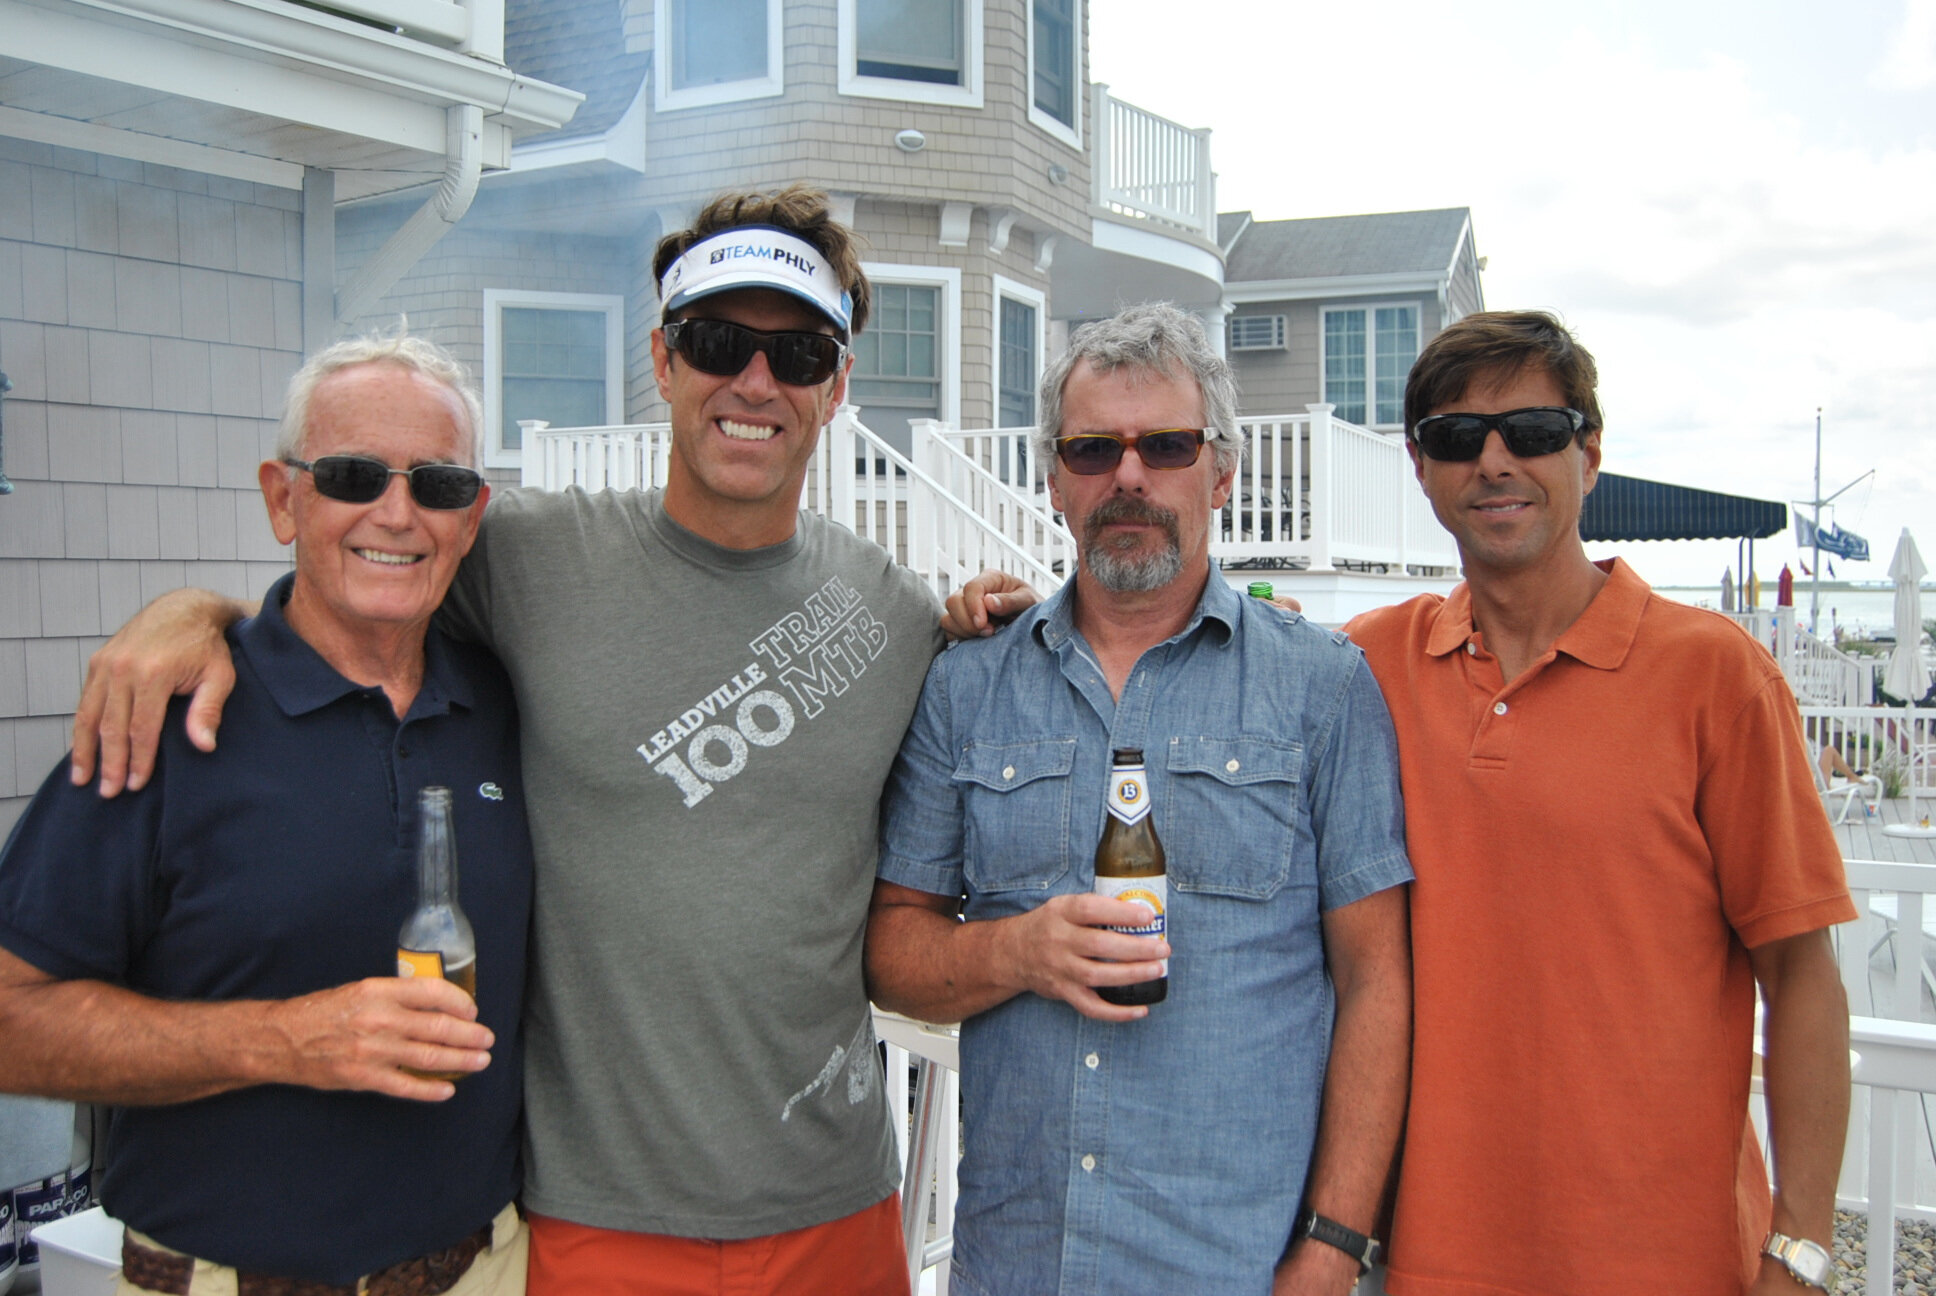 From left: David Crafts, David Cox (son), Edward Bankert (brother), and Greg Eger (son-in-law)